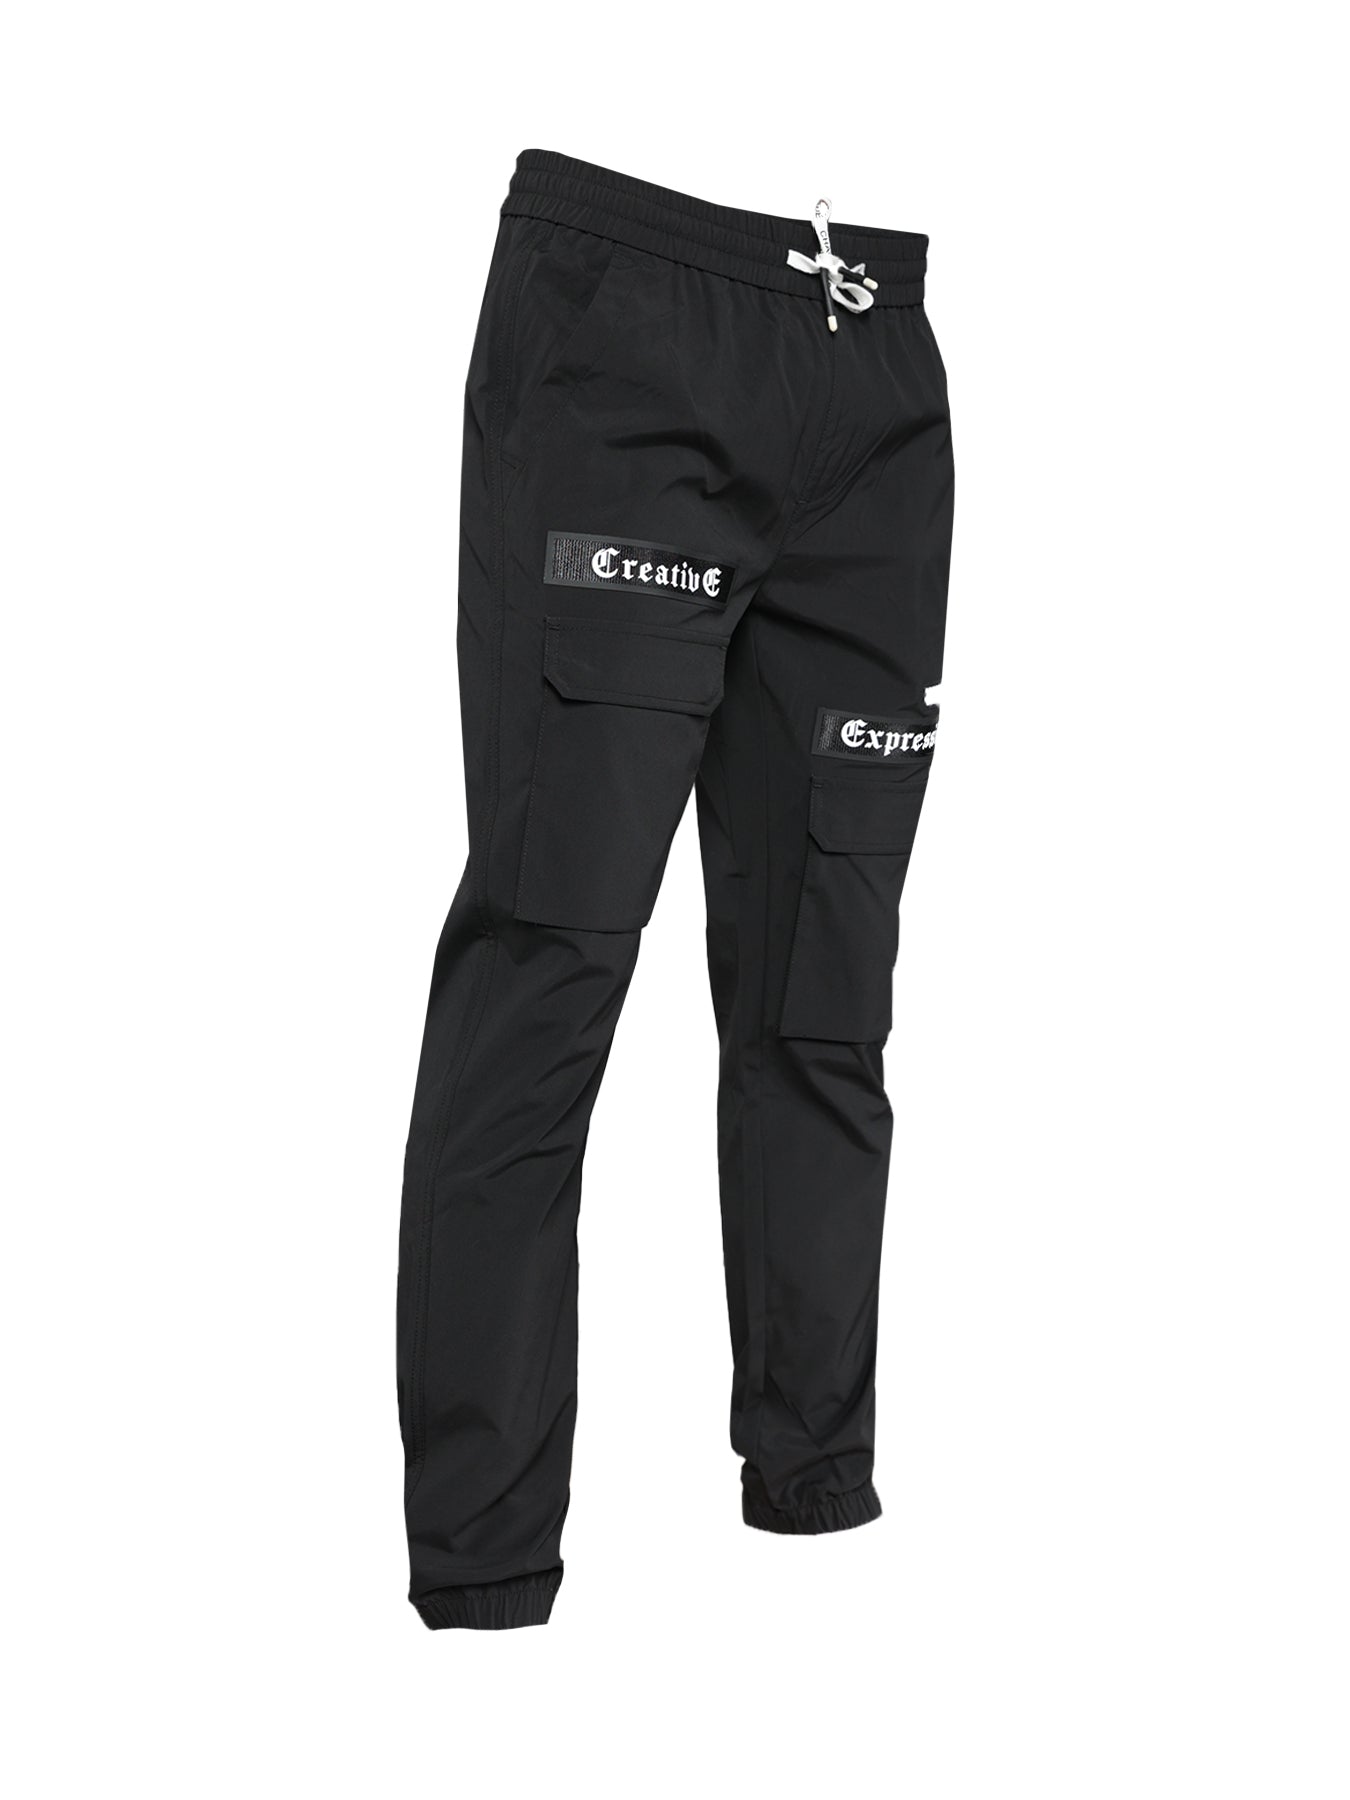 "Creative Expression" Joggers